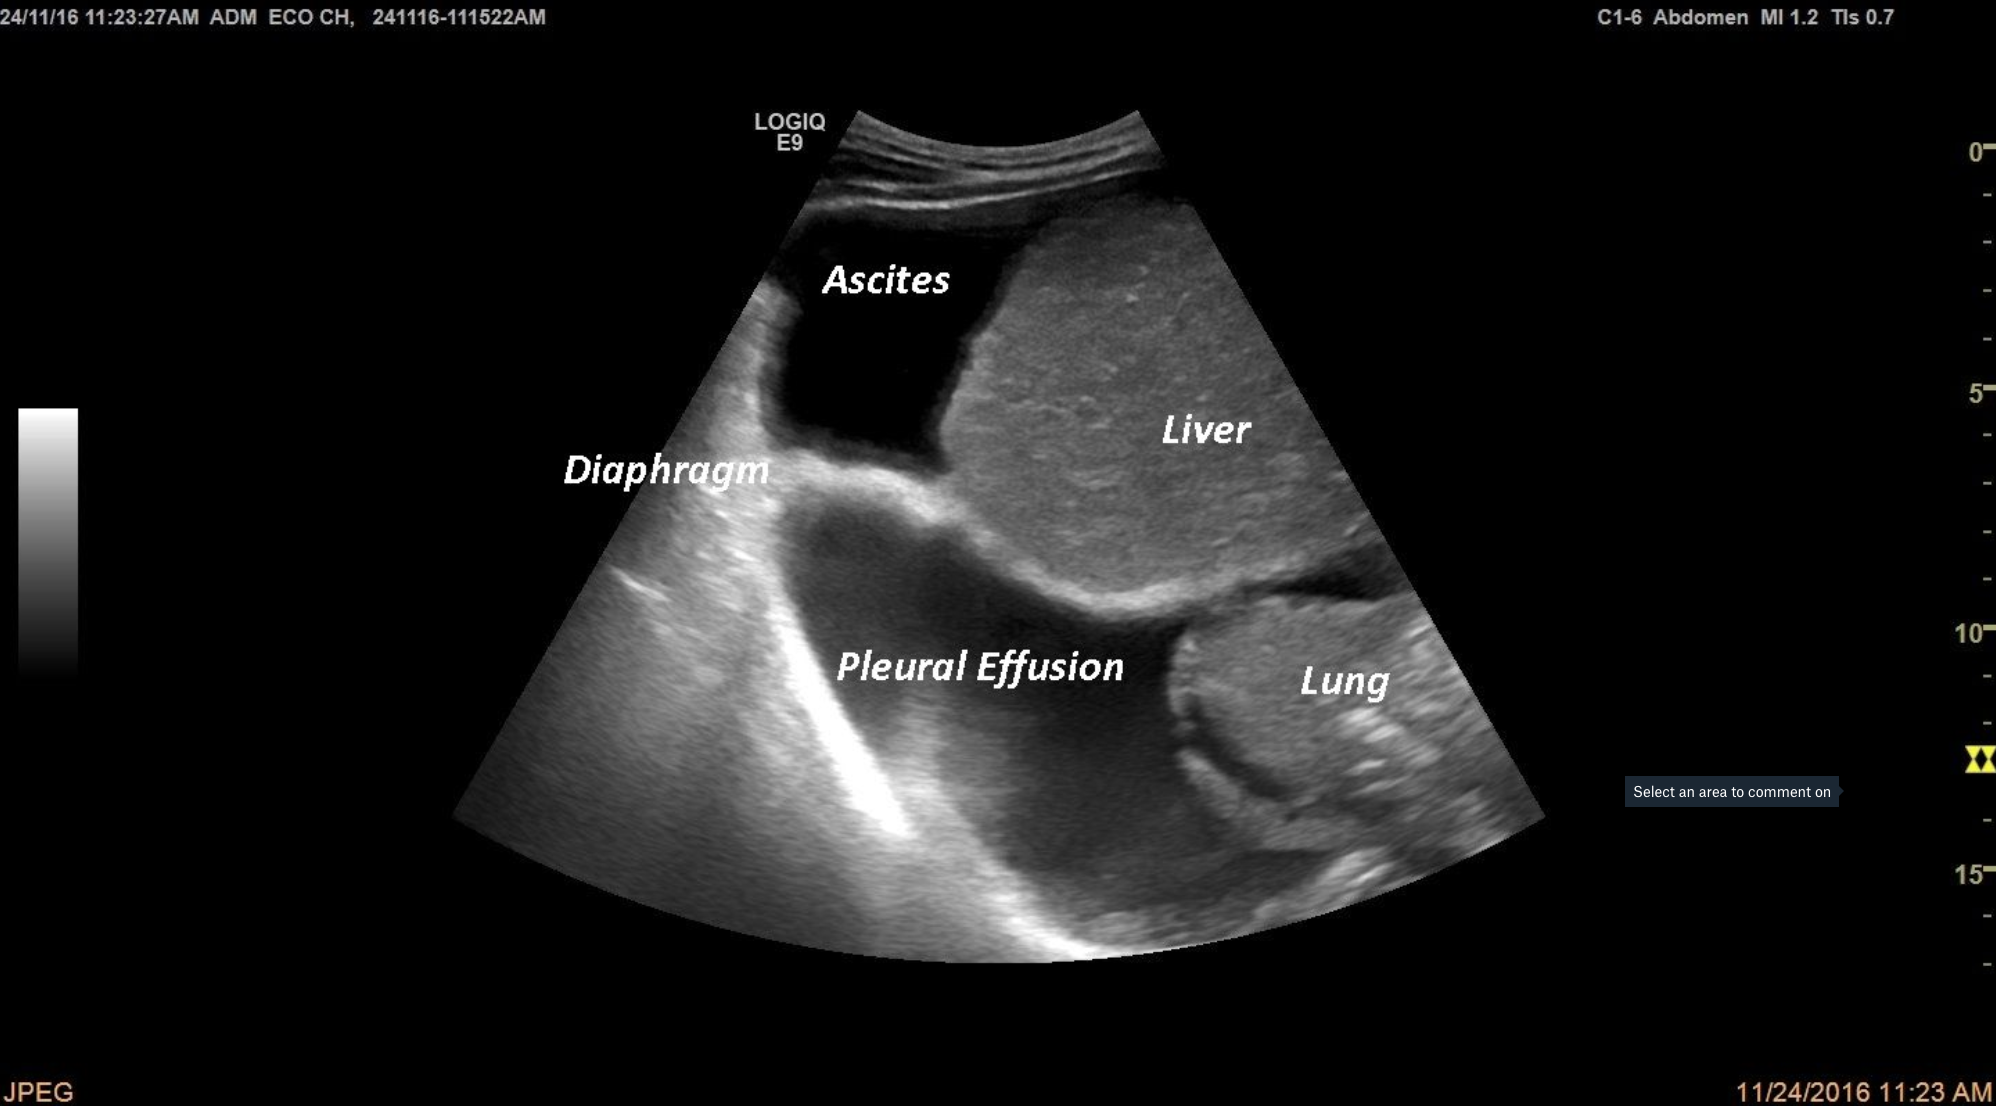 Ascites and Pleural Effusion in a cirrhotic patient [1 image]